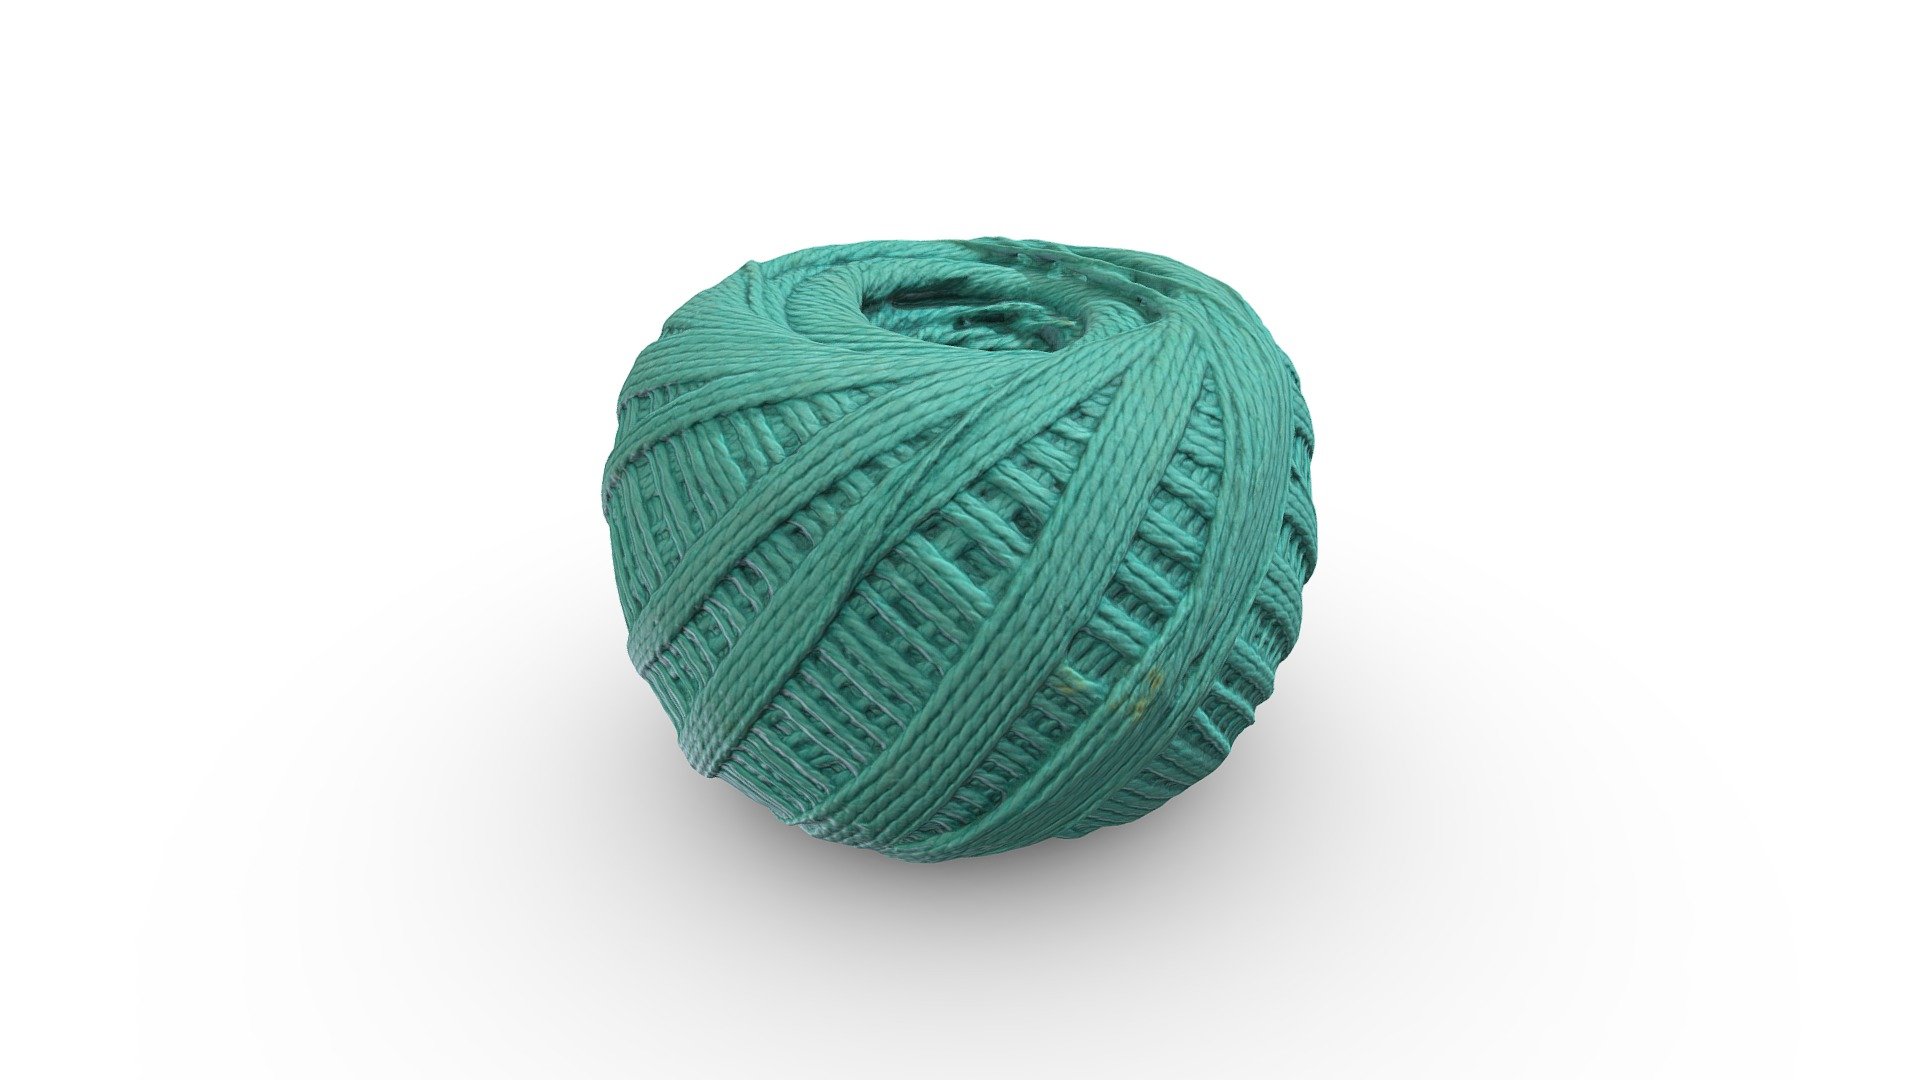 High-poly green ball of thread photogrammetry scan. PBR texture maps 4096x4096 px. resolution for metallic or specular workflow. Scan from real thread, high-poly 3D model, 4K resolution textures.

Additional file contains low-poly 3d model version, game-ready in real time 3d model